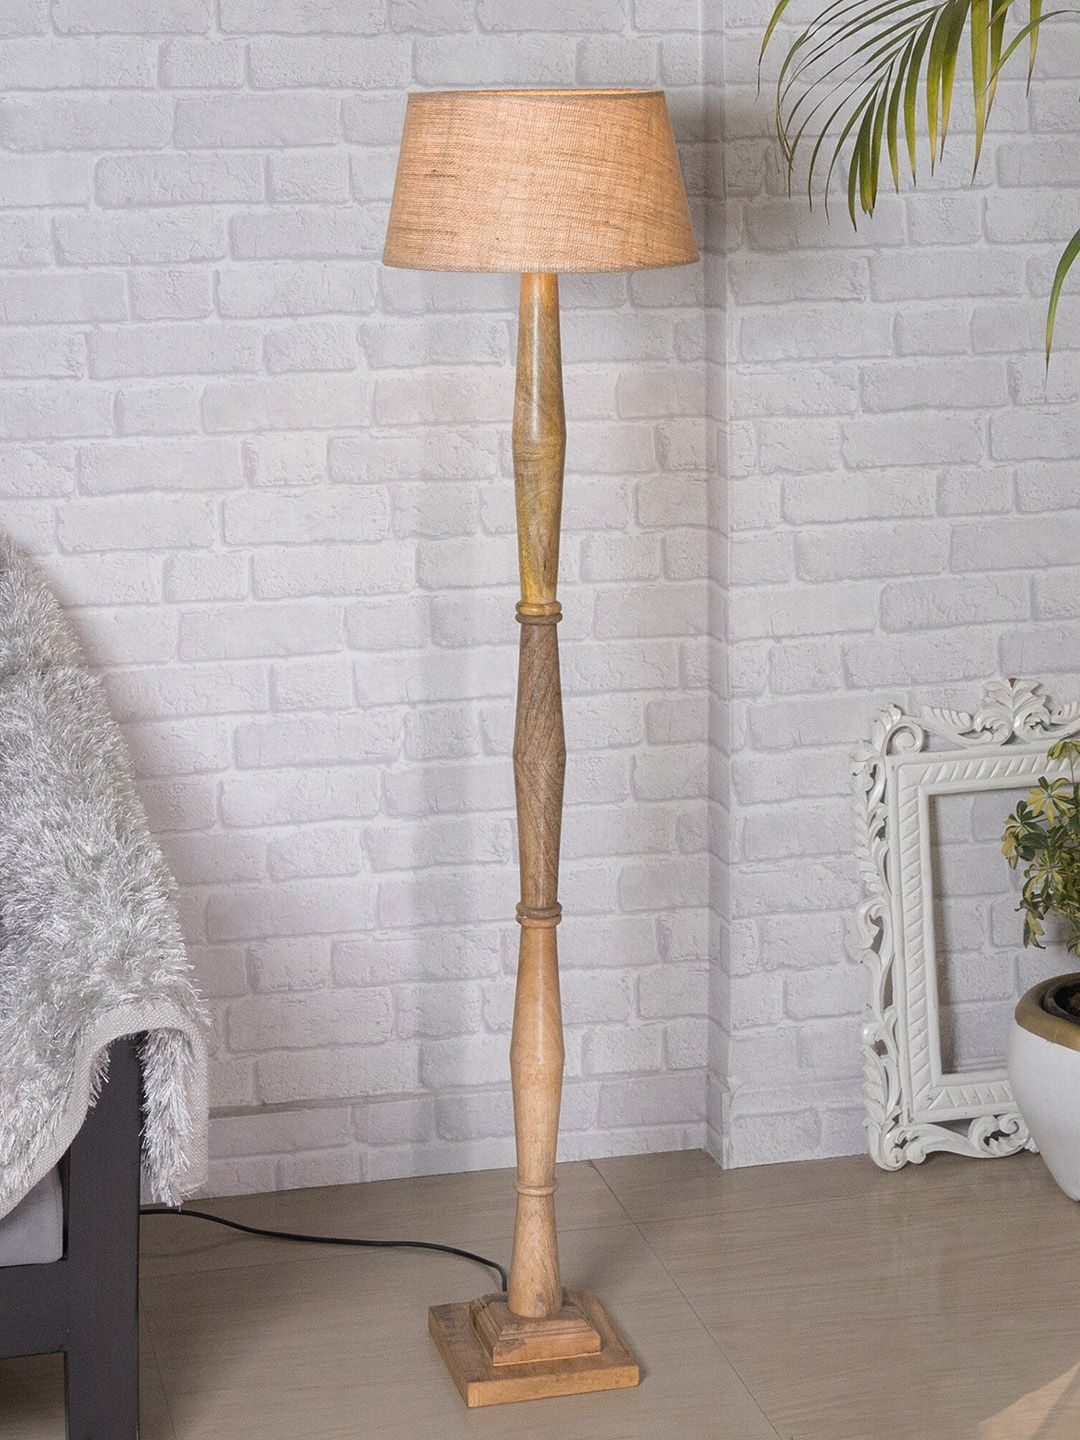 Homesake Brown Wooden Candlestick Floor Lamp With Jute Drum Shade Price in India